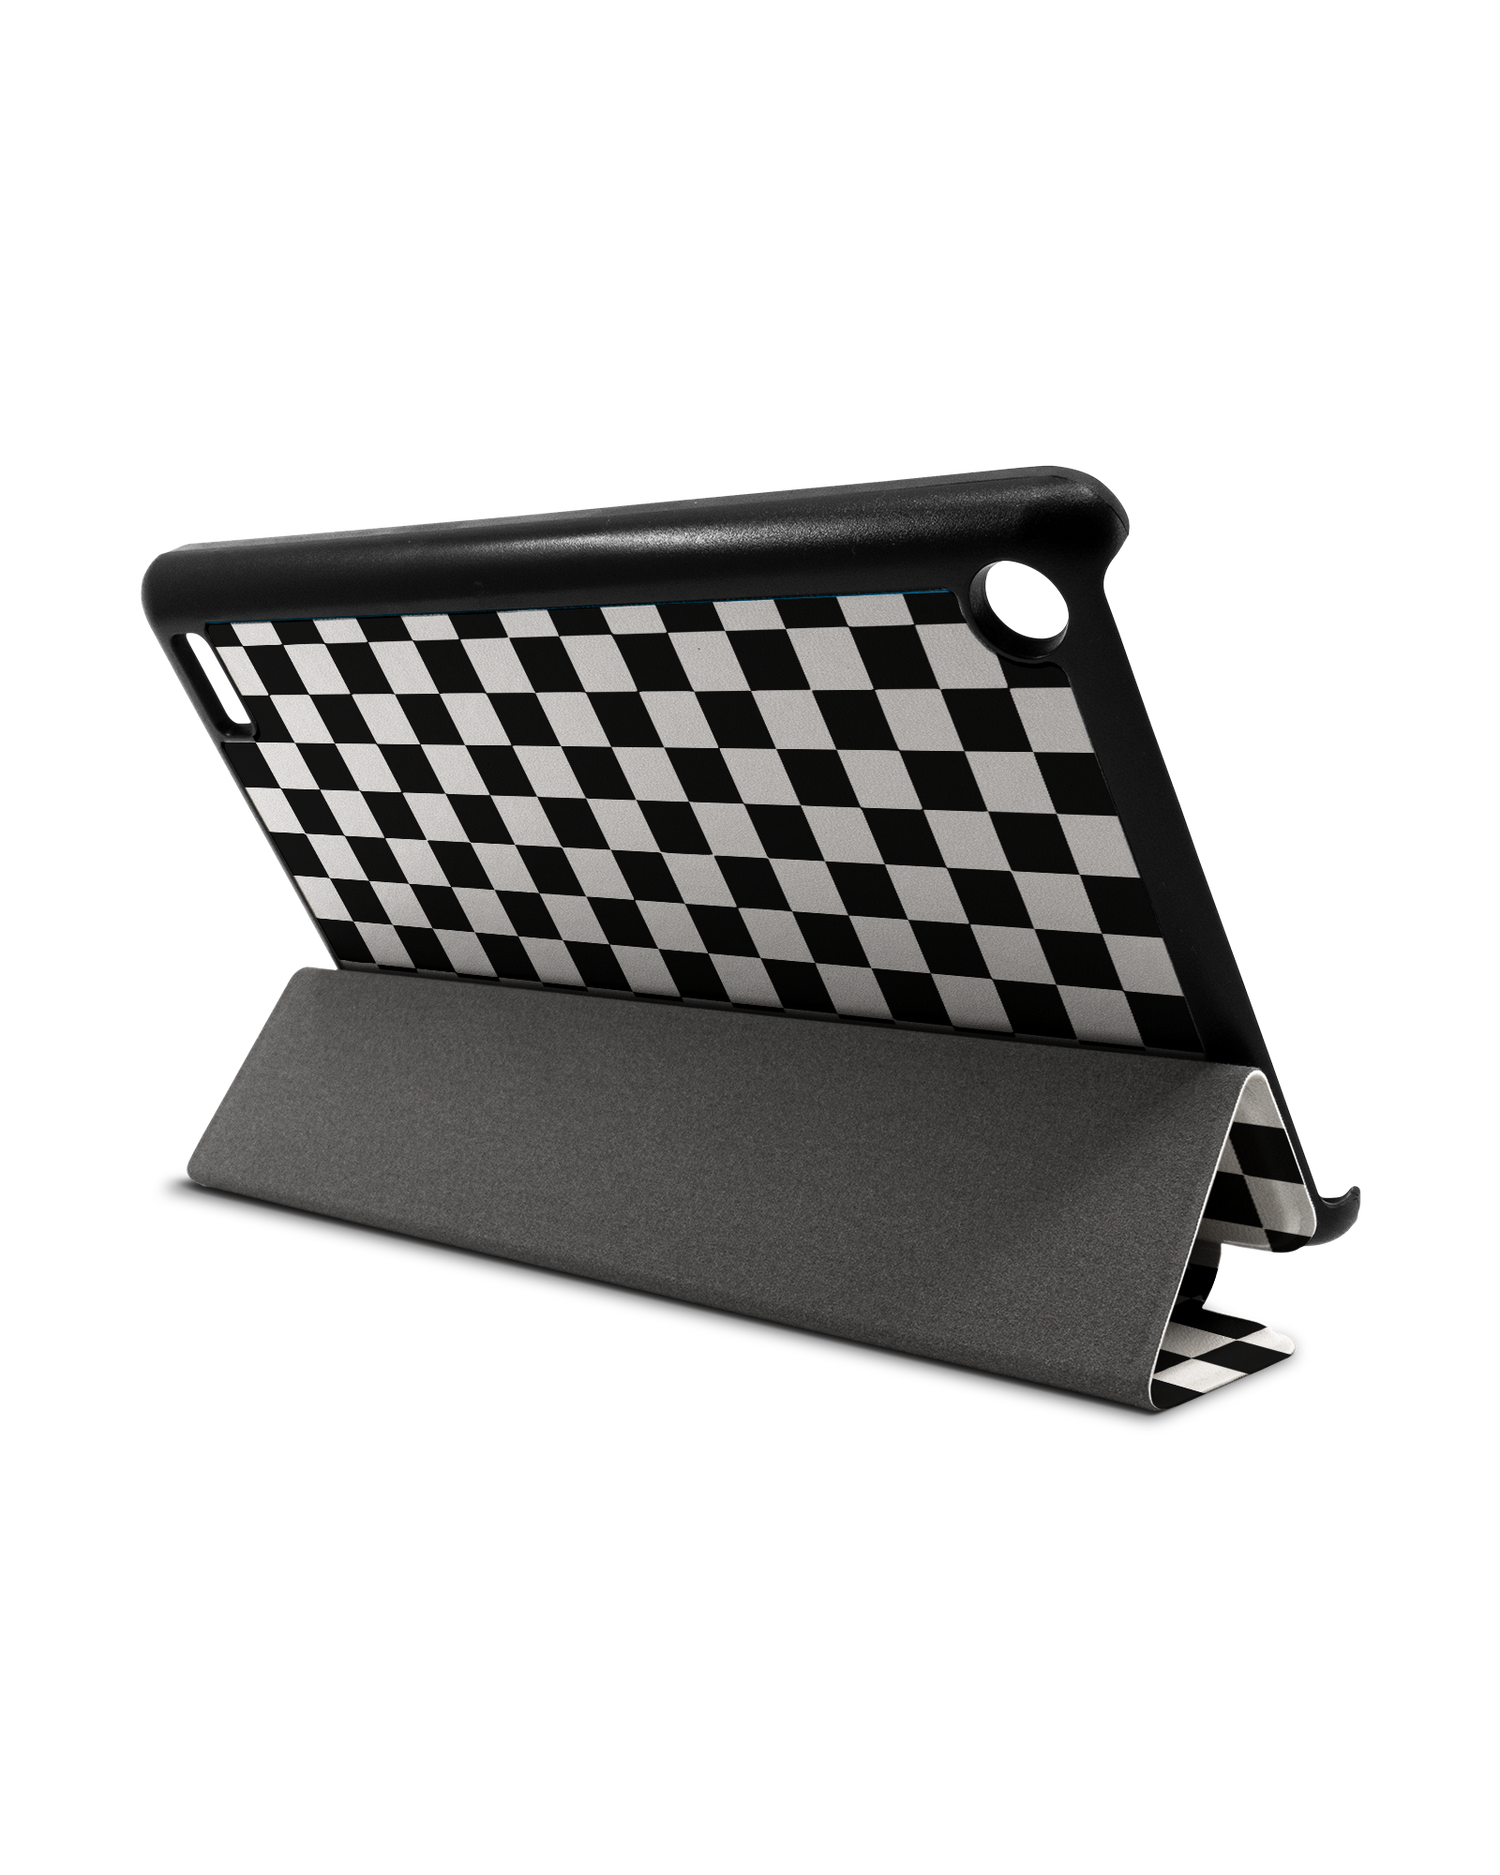 Squares Tablet Smart Case for Amazon Fire 7: Used as Stand